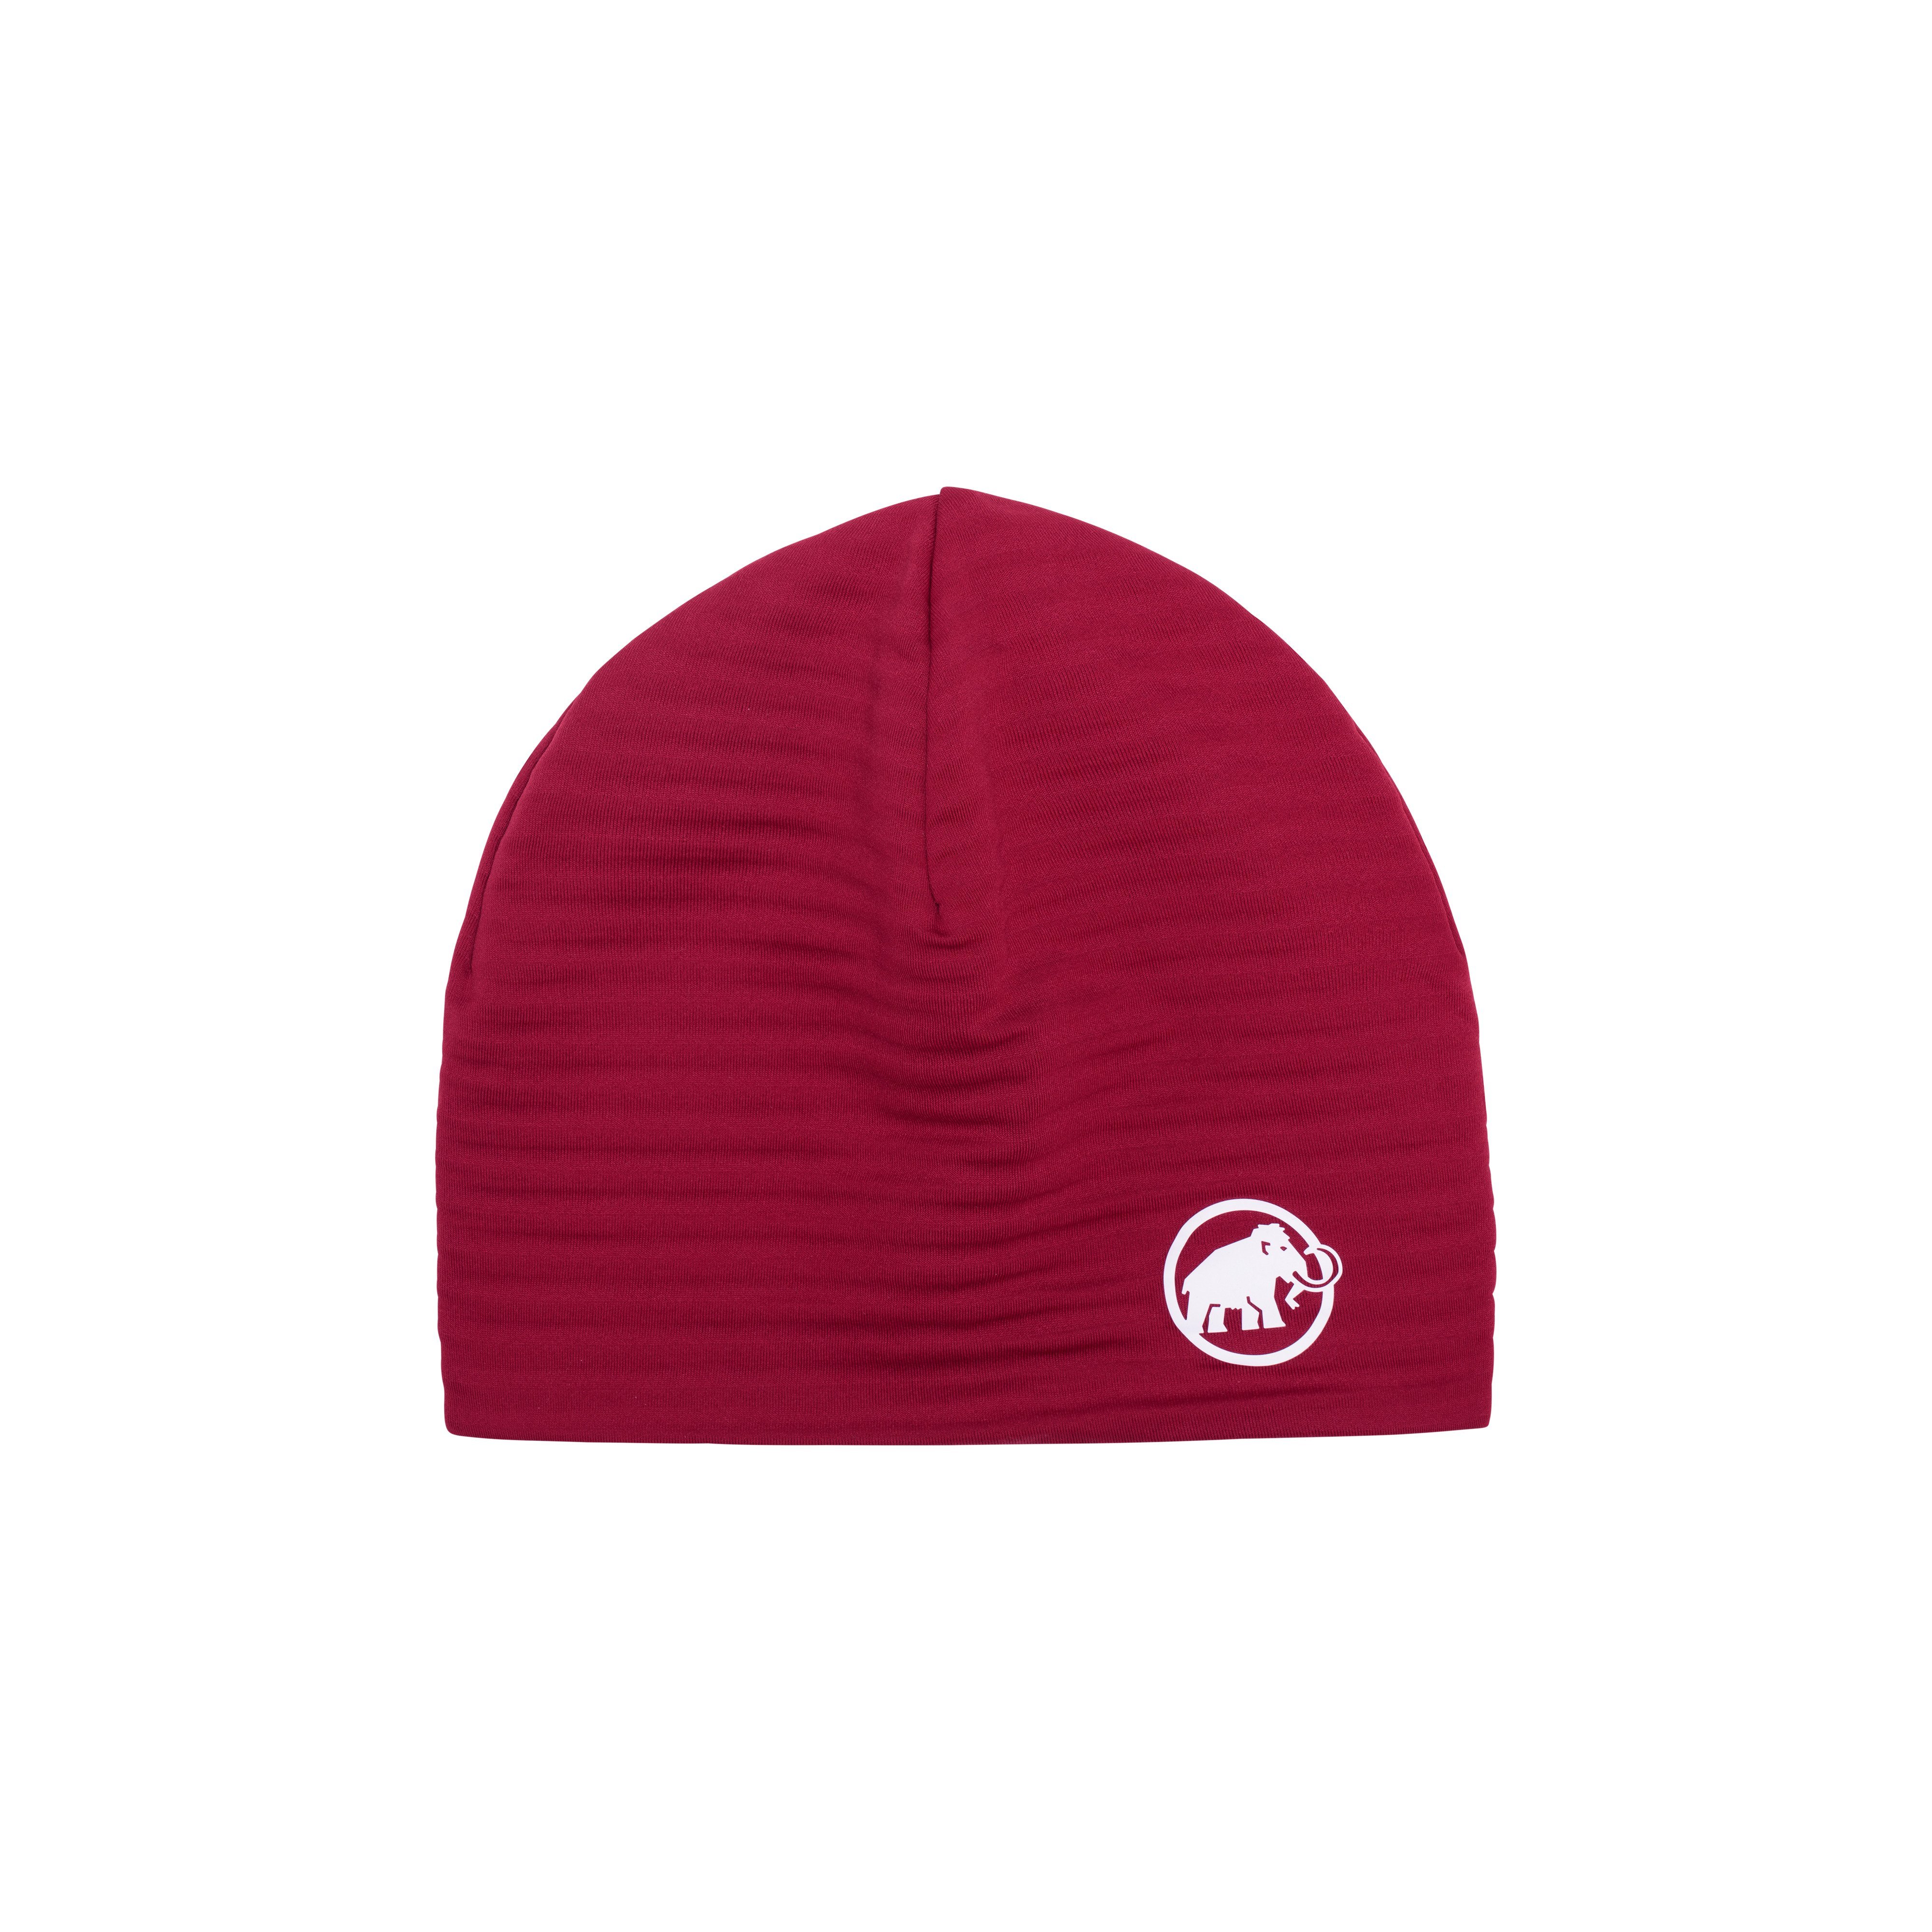 Taiss Light Beanie - blood red, one size thumbnail